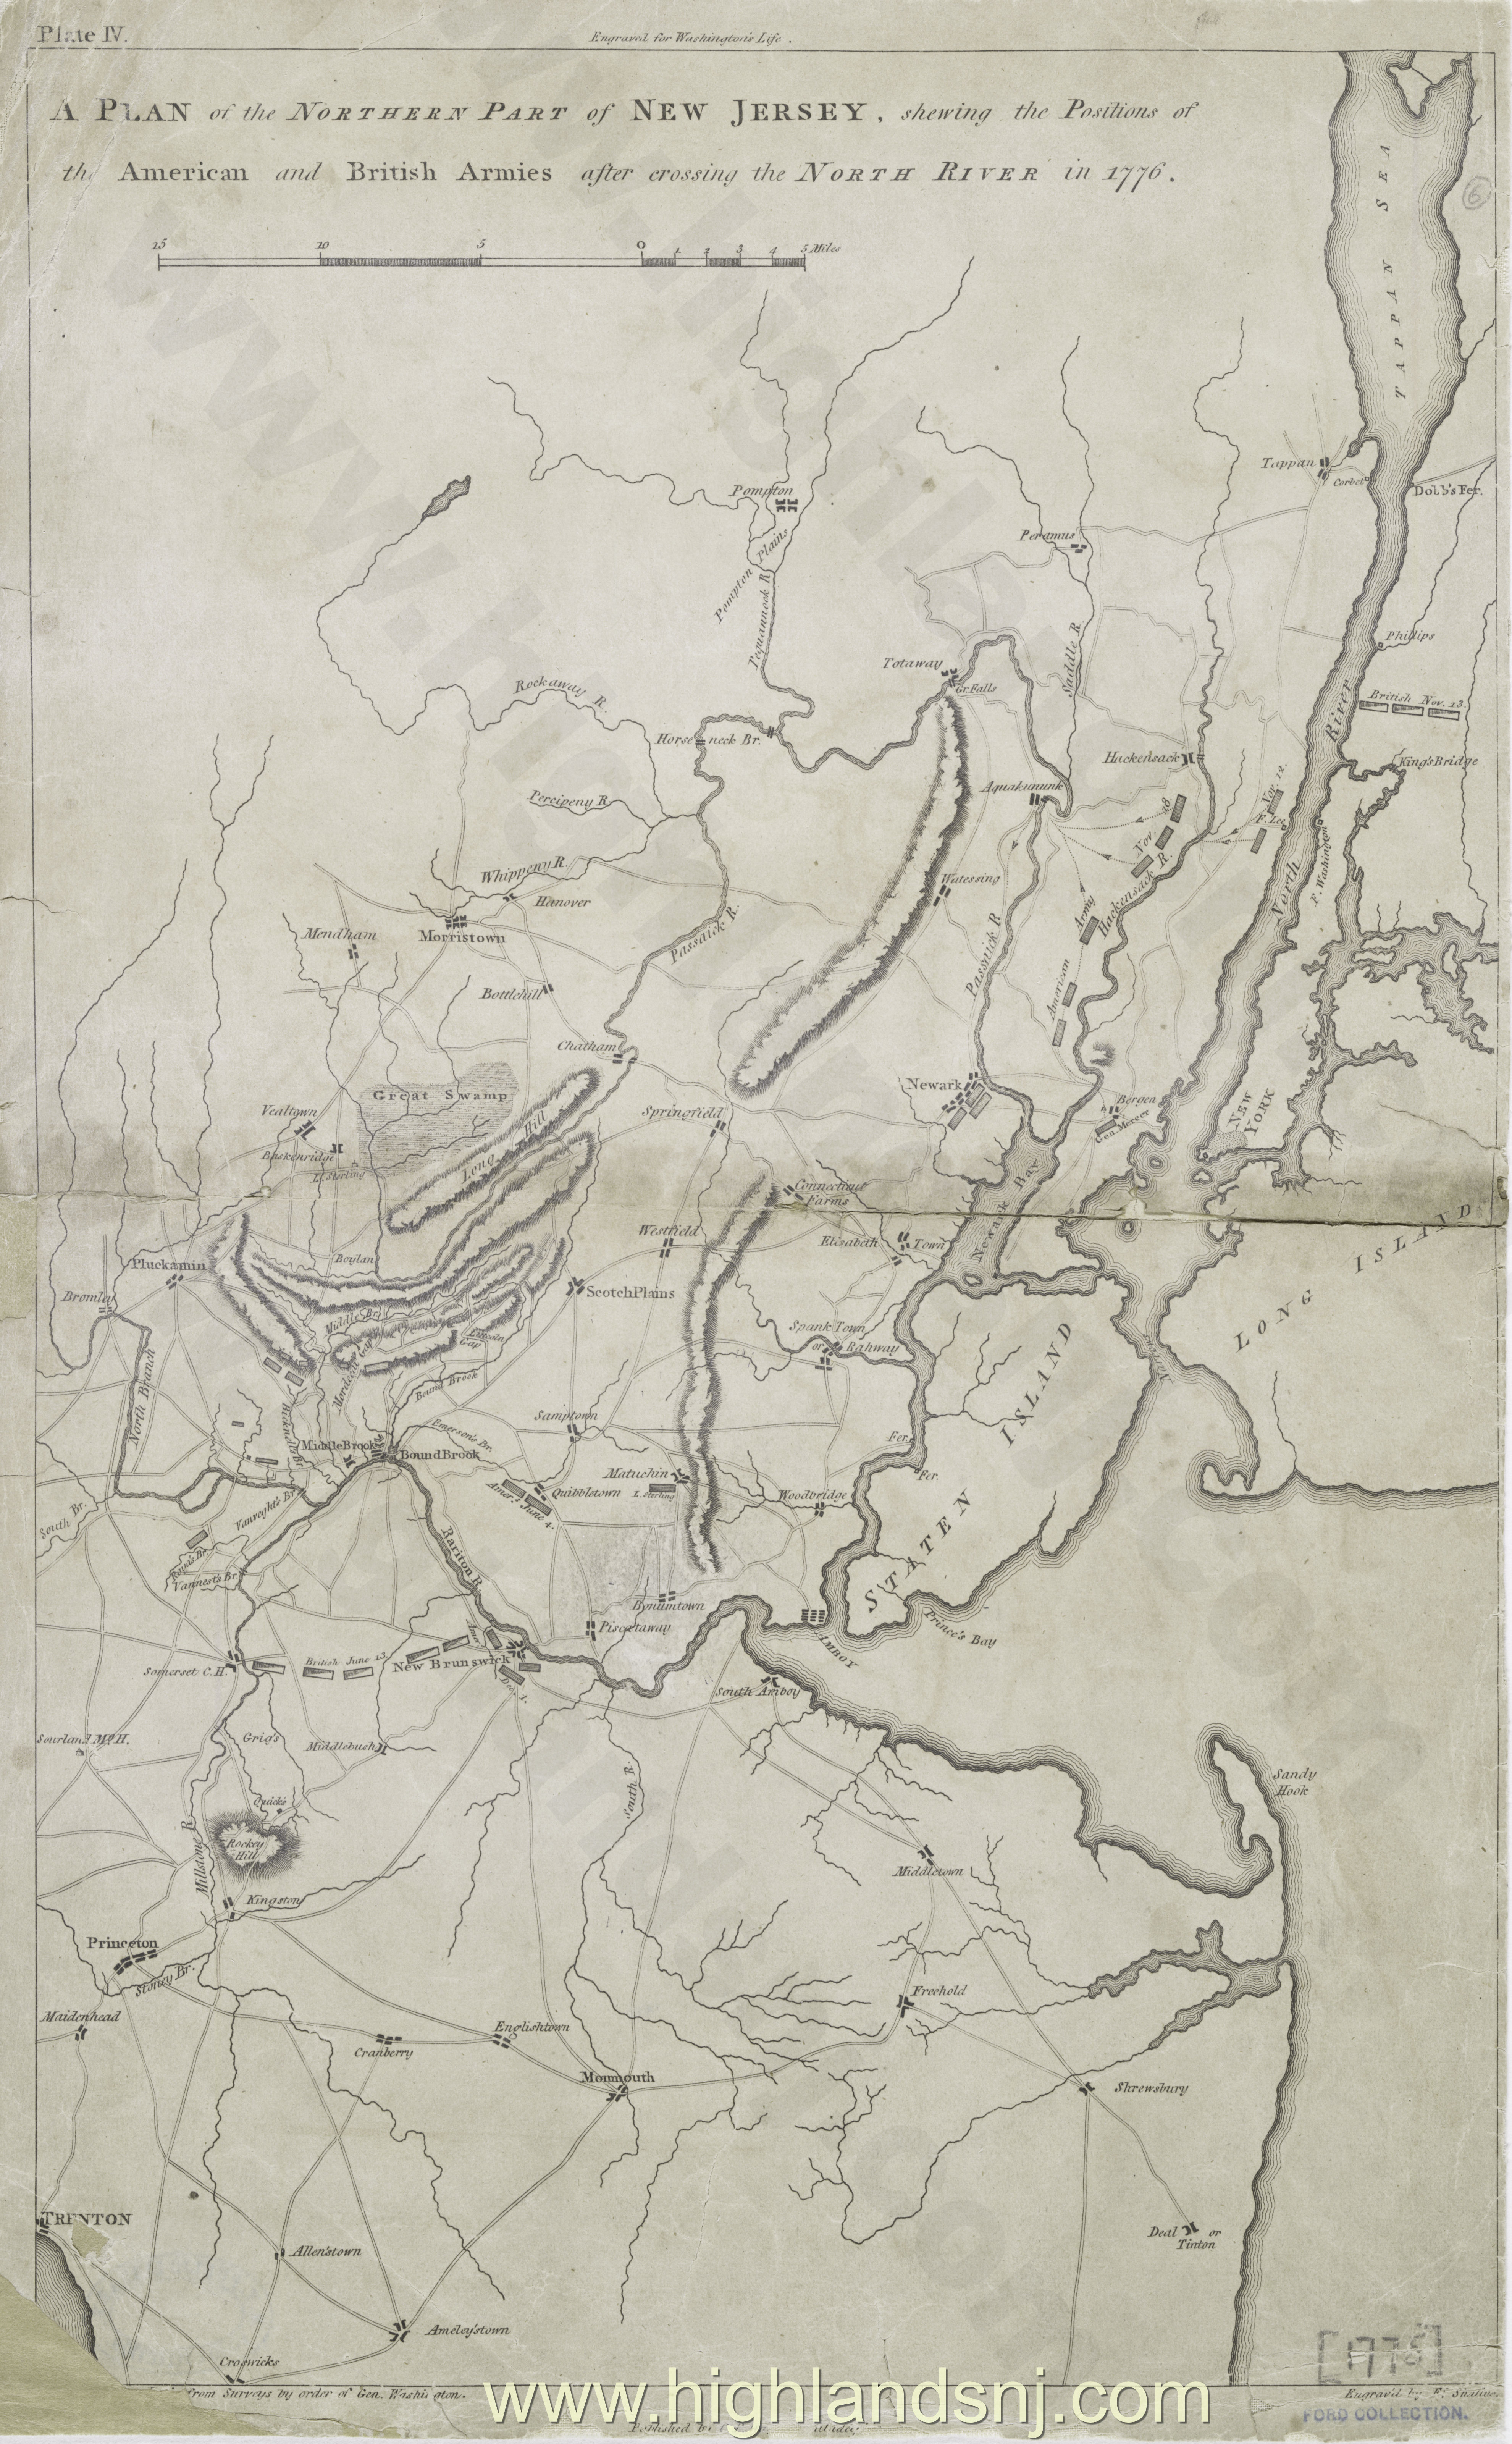 1807 plan of the northern part of New Jersey nypldigitalcollections